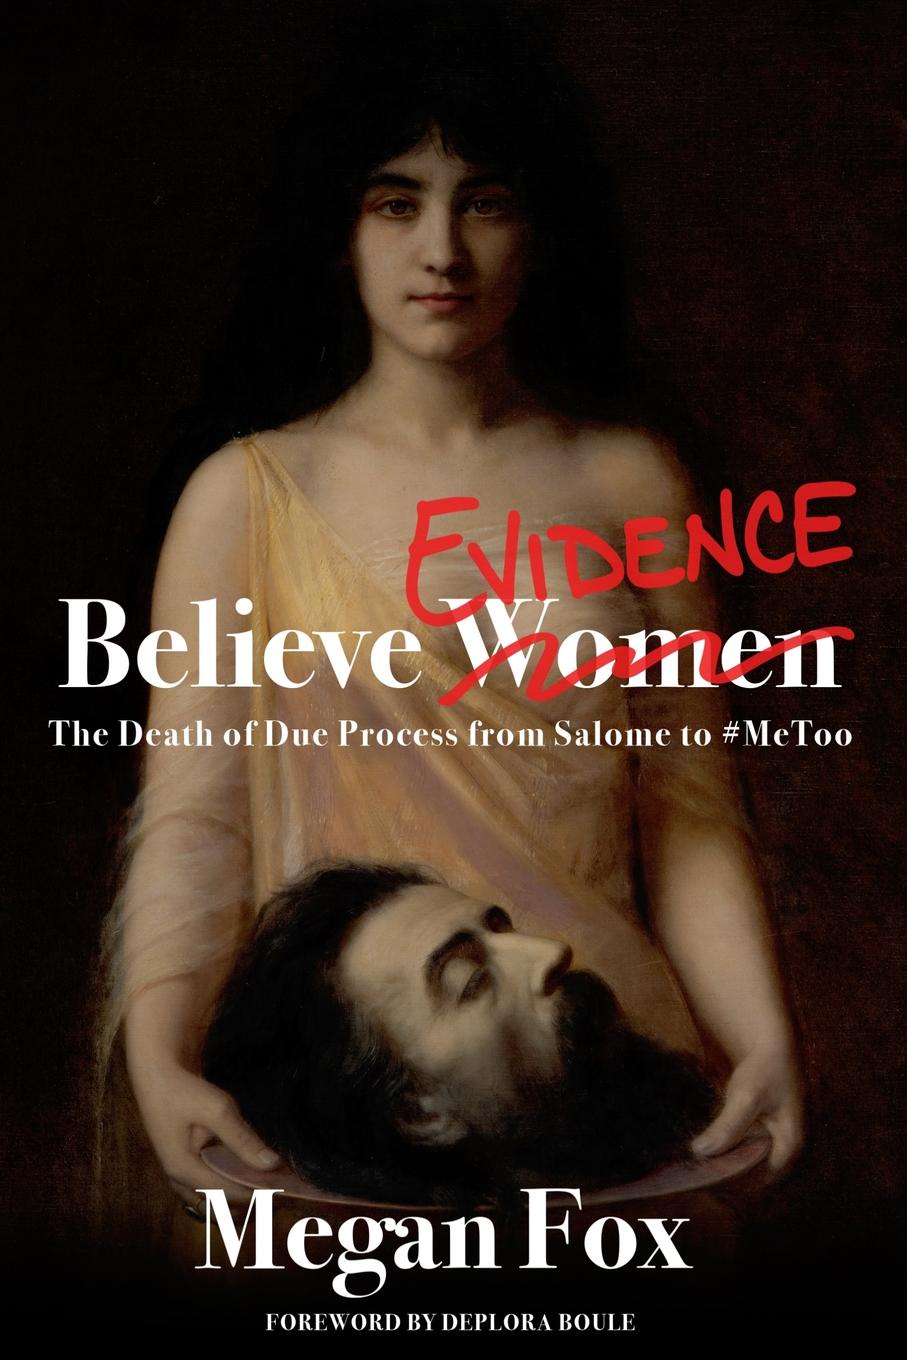 Believe Evidence. The Death of Due Process from Salome to .MeToo